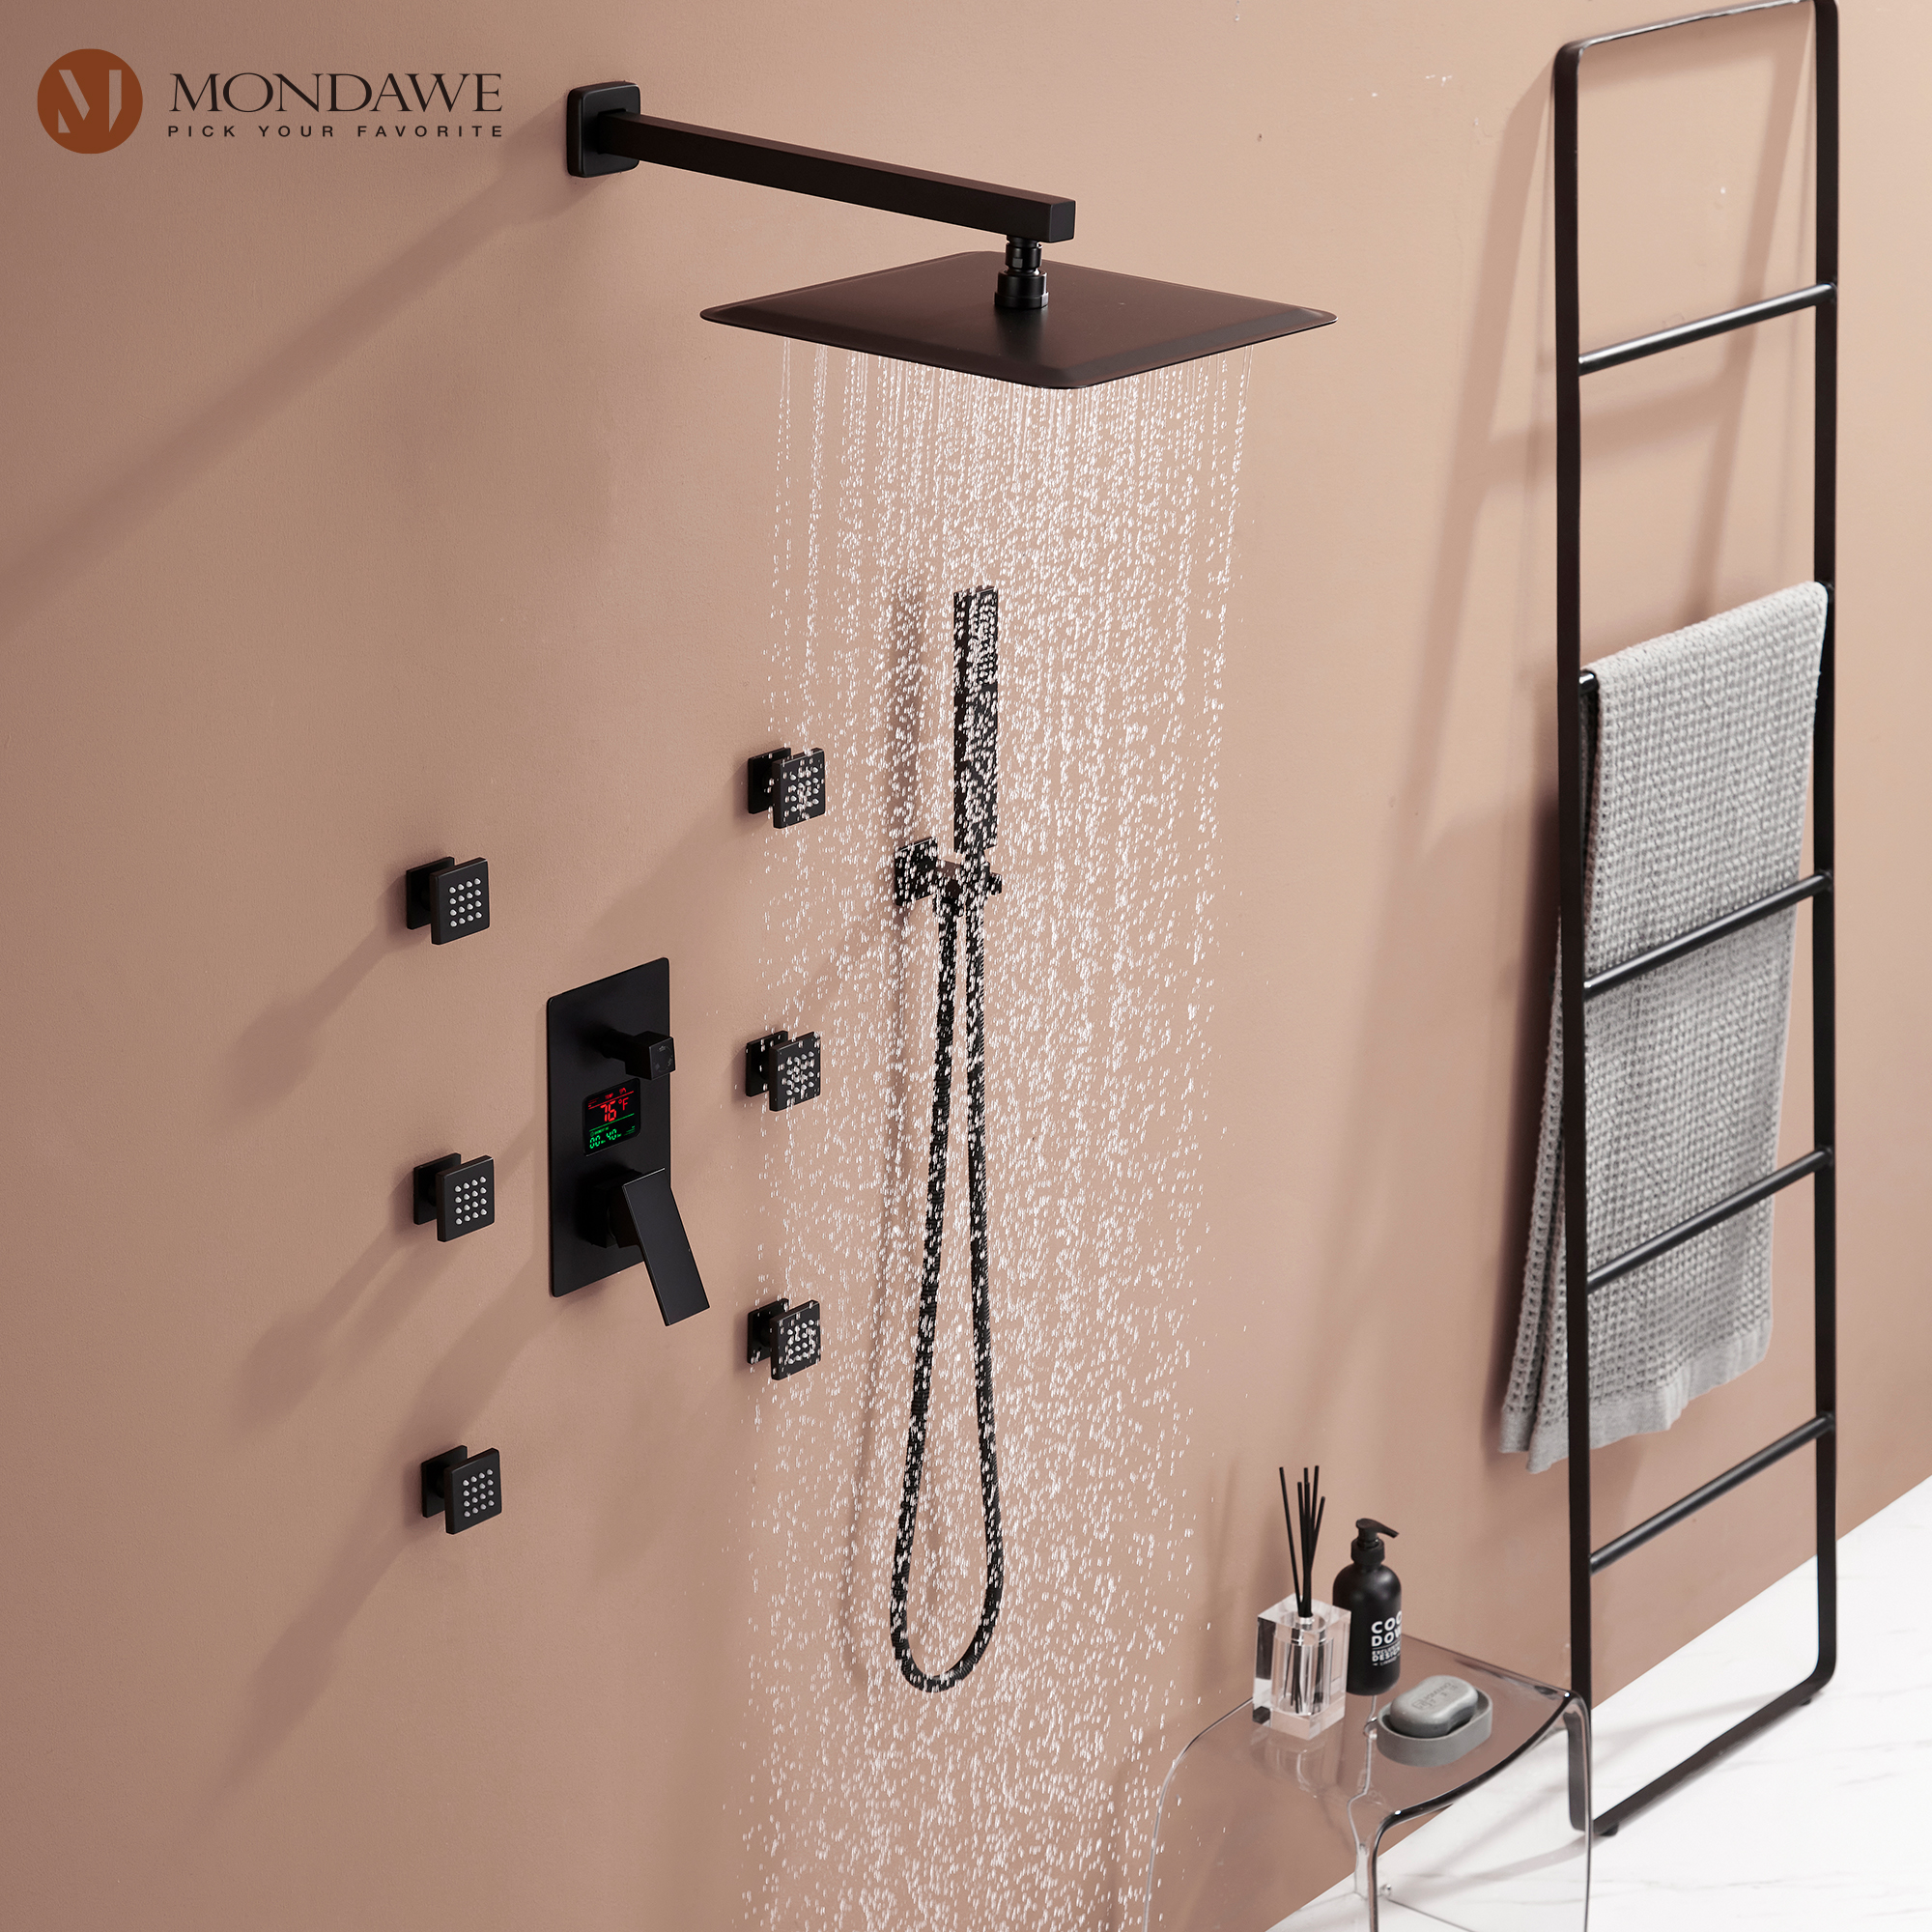 Wall Mount Thermostatic Rain Shower System with Handheld Shower, Wall Body Jets and Digital Display-Mondawe